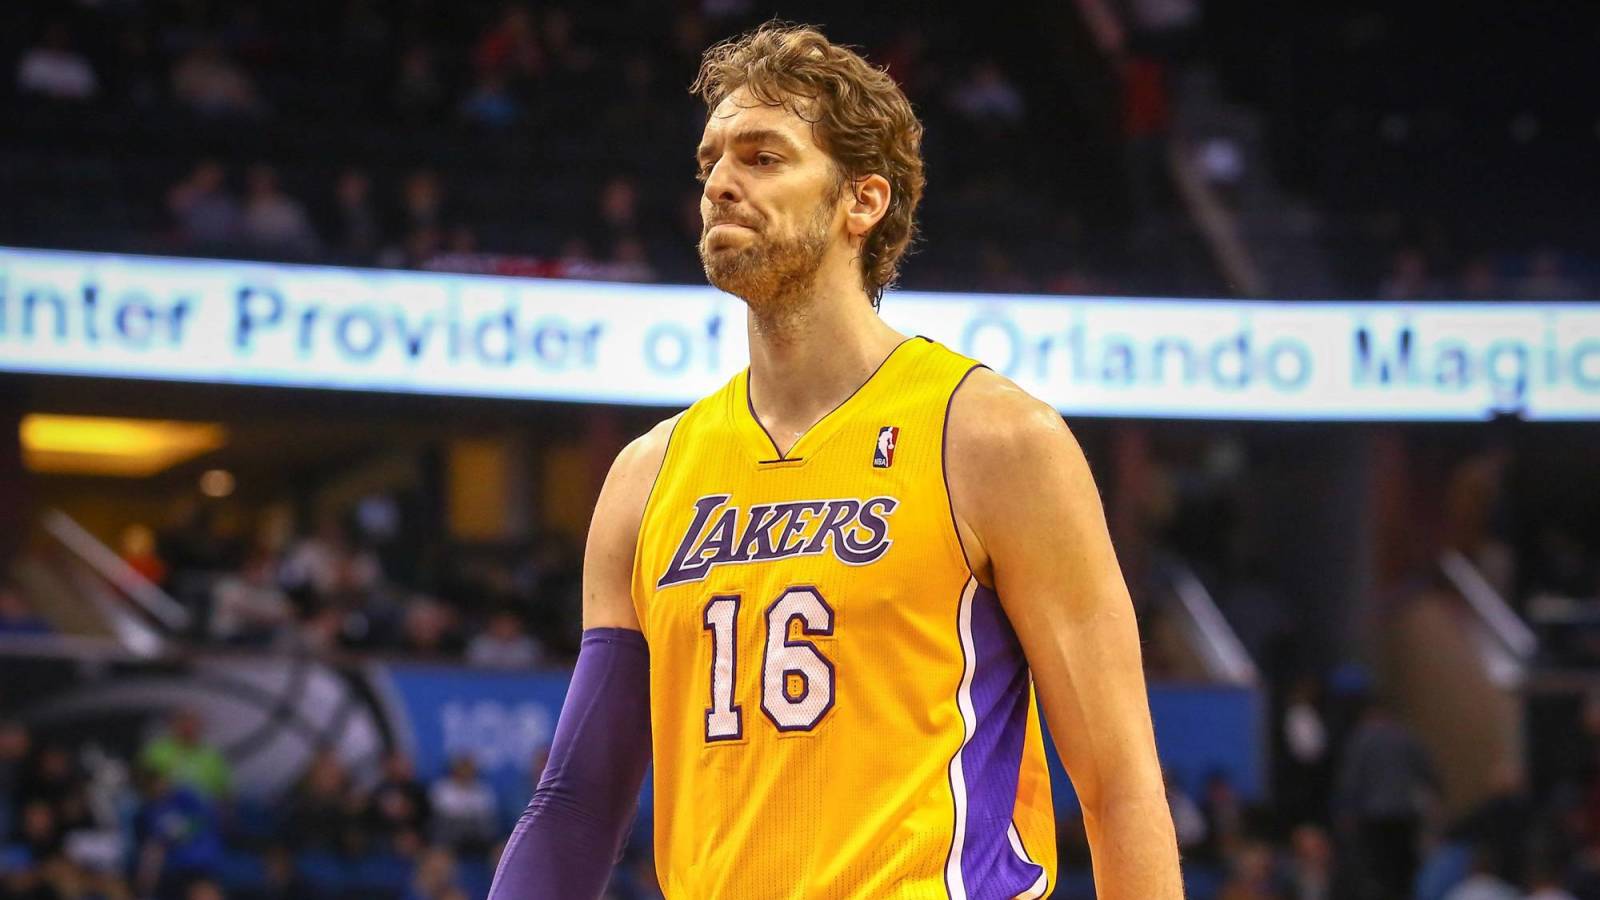 Lakers to retire Pau Gasol's No. 16 jersey in March - The Athletic